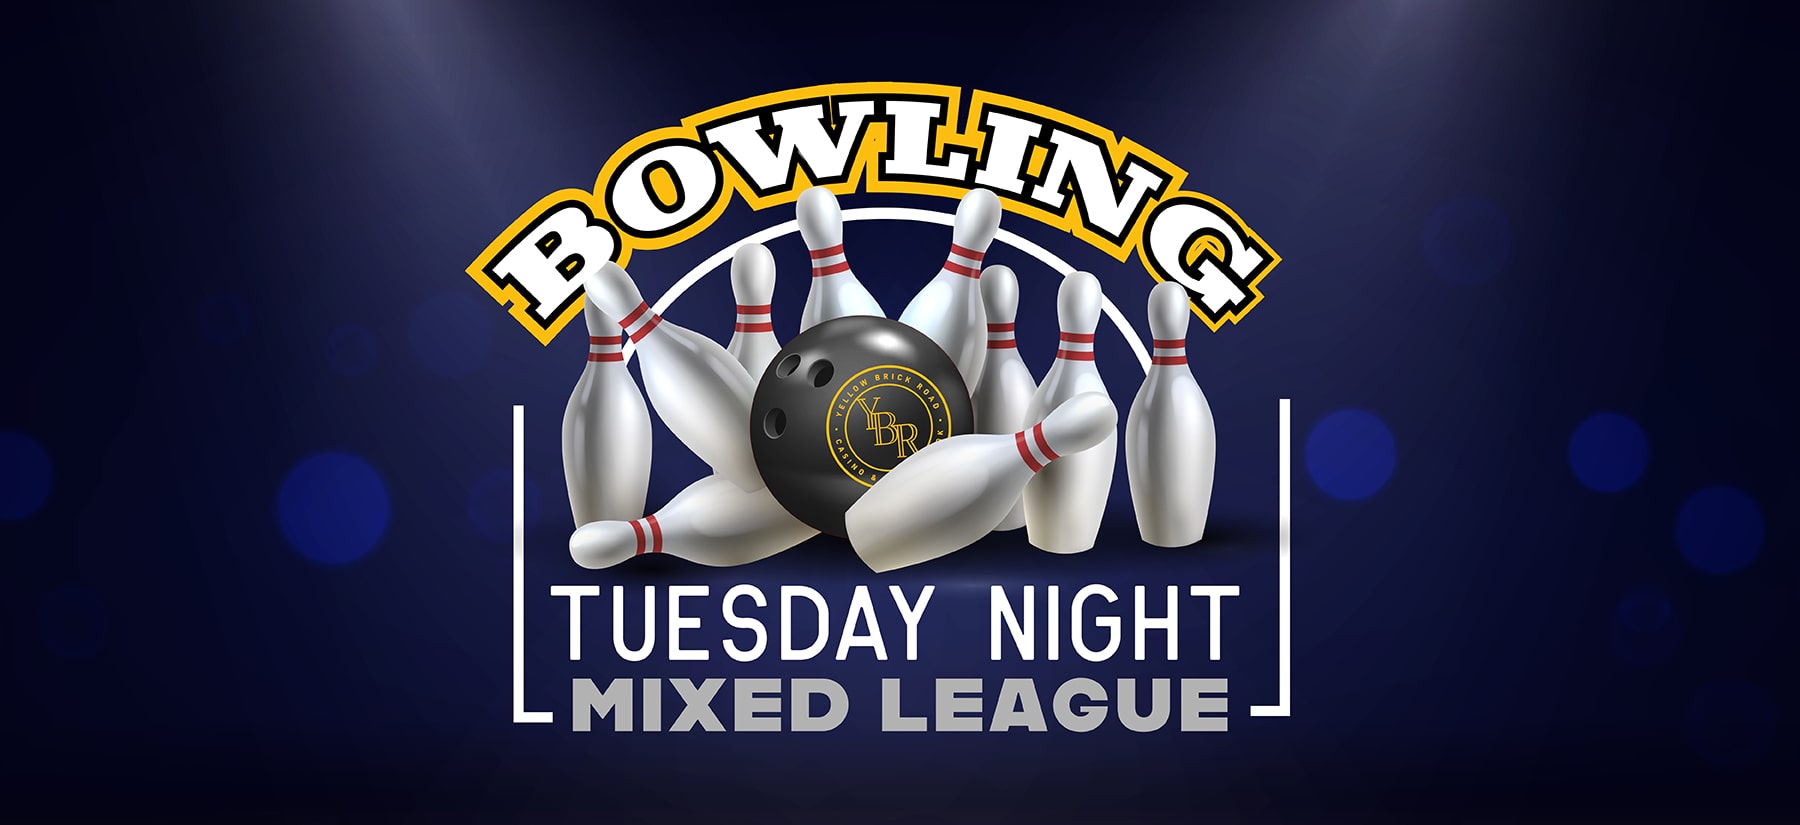 YBR Strikes with New Bowling League